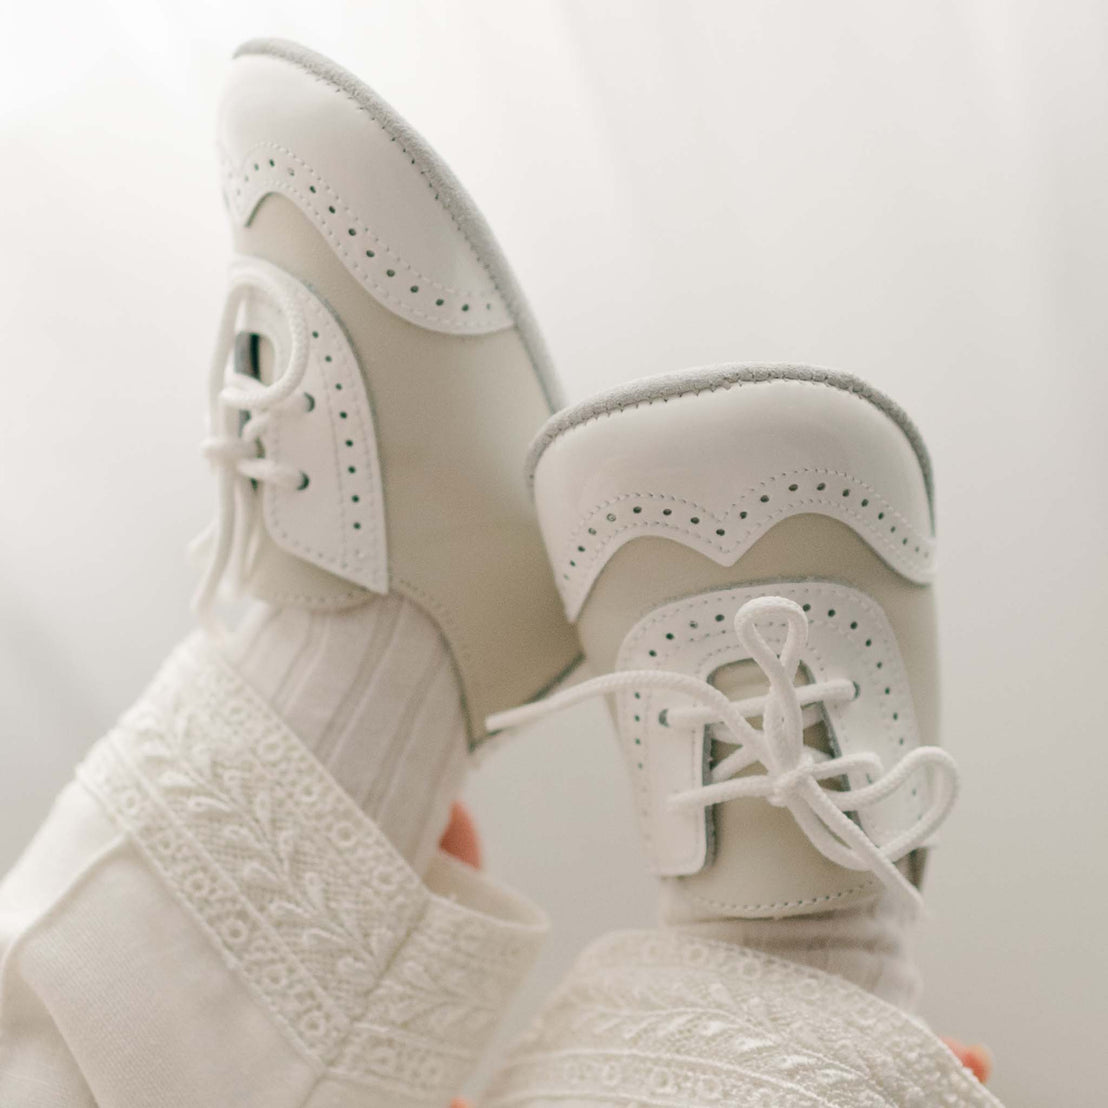 A close-up of elegant Boys Ivory Two Tone Wingtip Shoes with intricate detailing and perforations, against a soft, light background. These vintage boots are truly an upscale heirloom piece.